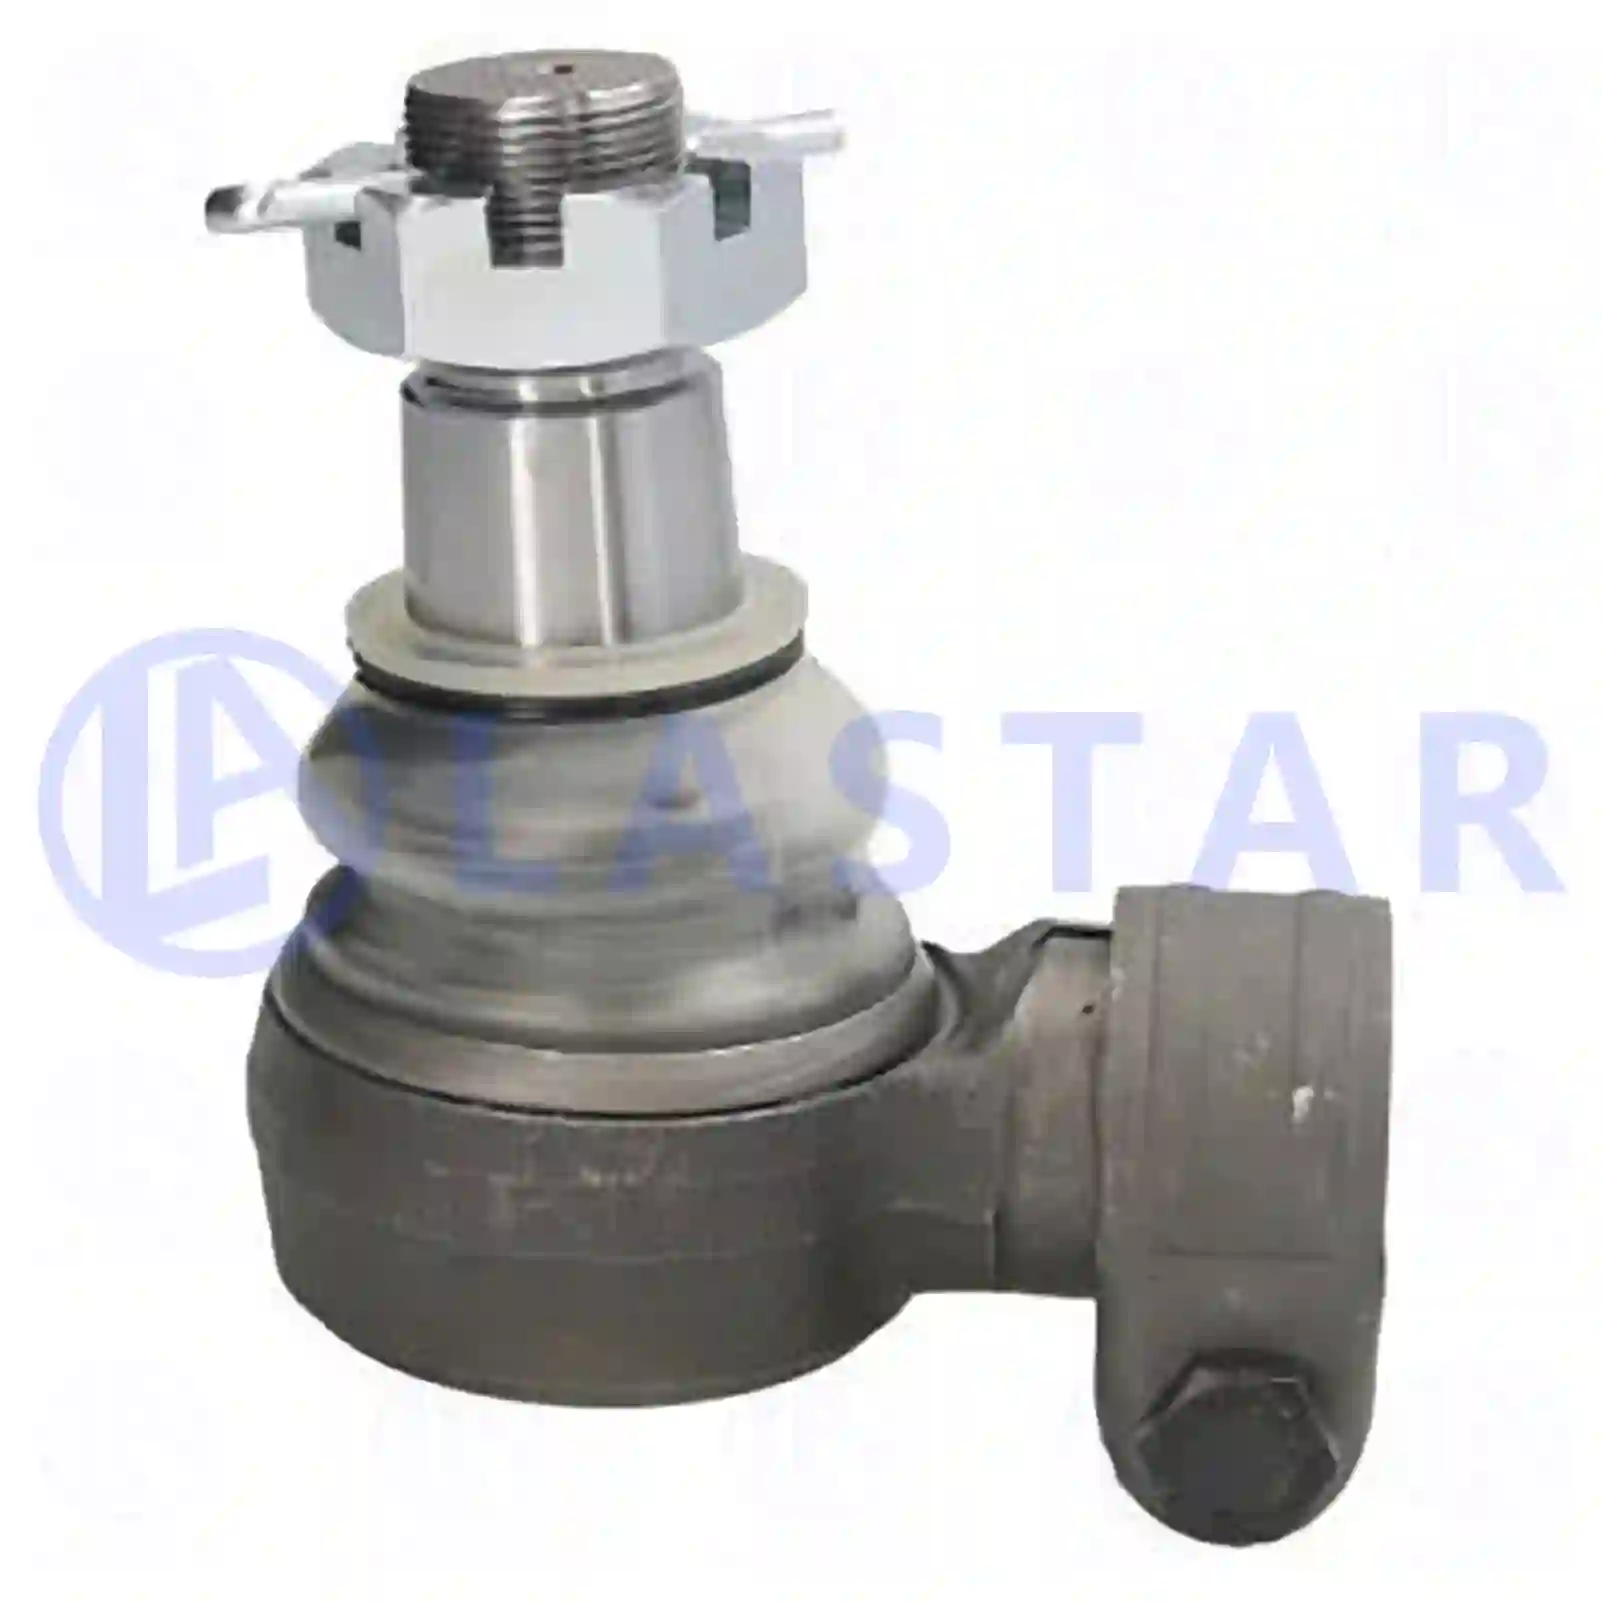 Ball joint, right hand thread, 77705316, 00166467, 98166467, 1212146, 1271125, 4143415, 7364001574, 42530316, 42538047, 93157156, 98166467, 81953016232, 011019986, 5001823718, 281953016232, 7364001574, 3090292, 3099129, ZG40407-0008 ||  77705316 Lastar Spare Part | Truck Spare Parts, Auotomotive Spare Parts Ball joint, right hand thread, 77705316, 00166467, 98166467, 1212146, 1271125, 4143415, 7364001574, 42530316, 42538047, 93157156, 98166467, 81953016232, 011019986, 5001823718, 281953016232, 7364001574, 3090292, 3099129, ZG40407-0008 ||  77705316 Lastar Spare Part | Truck Spare Parts, Auotomotive Spare Parts